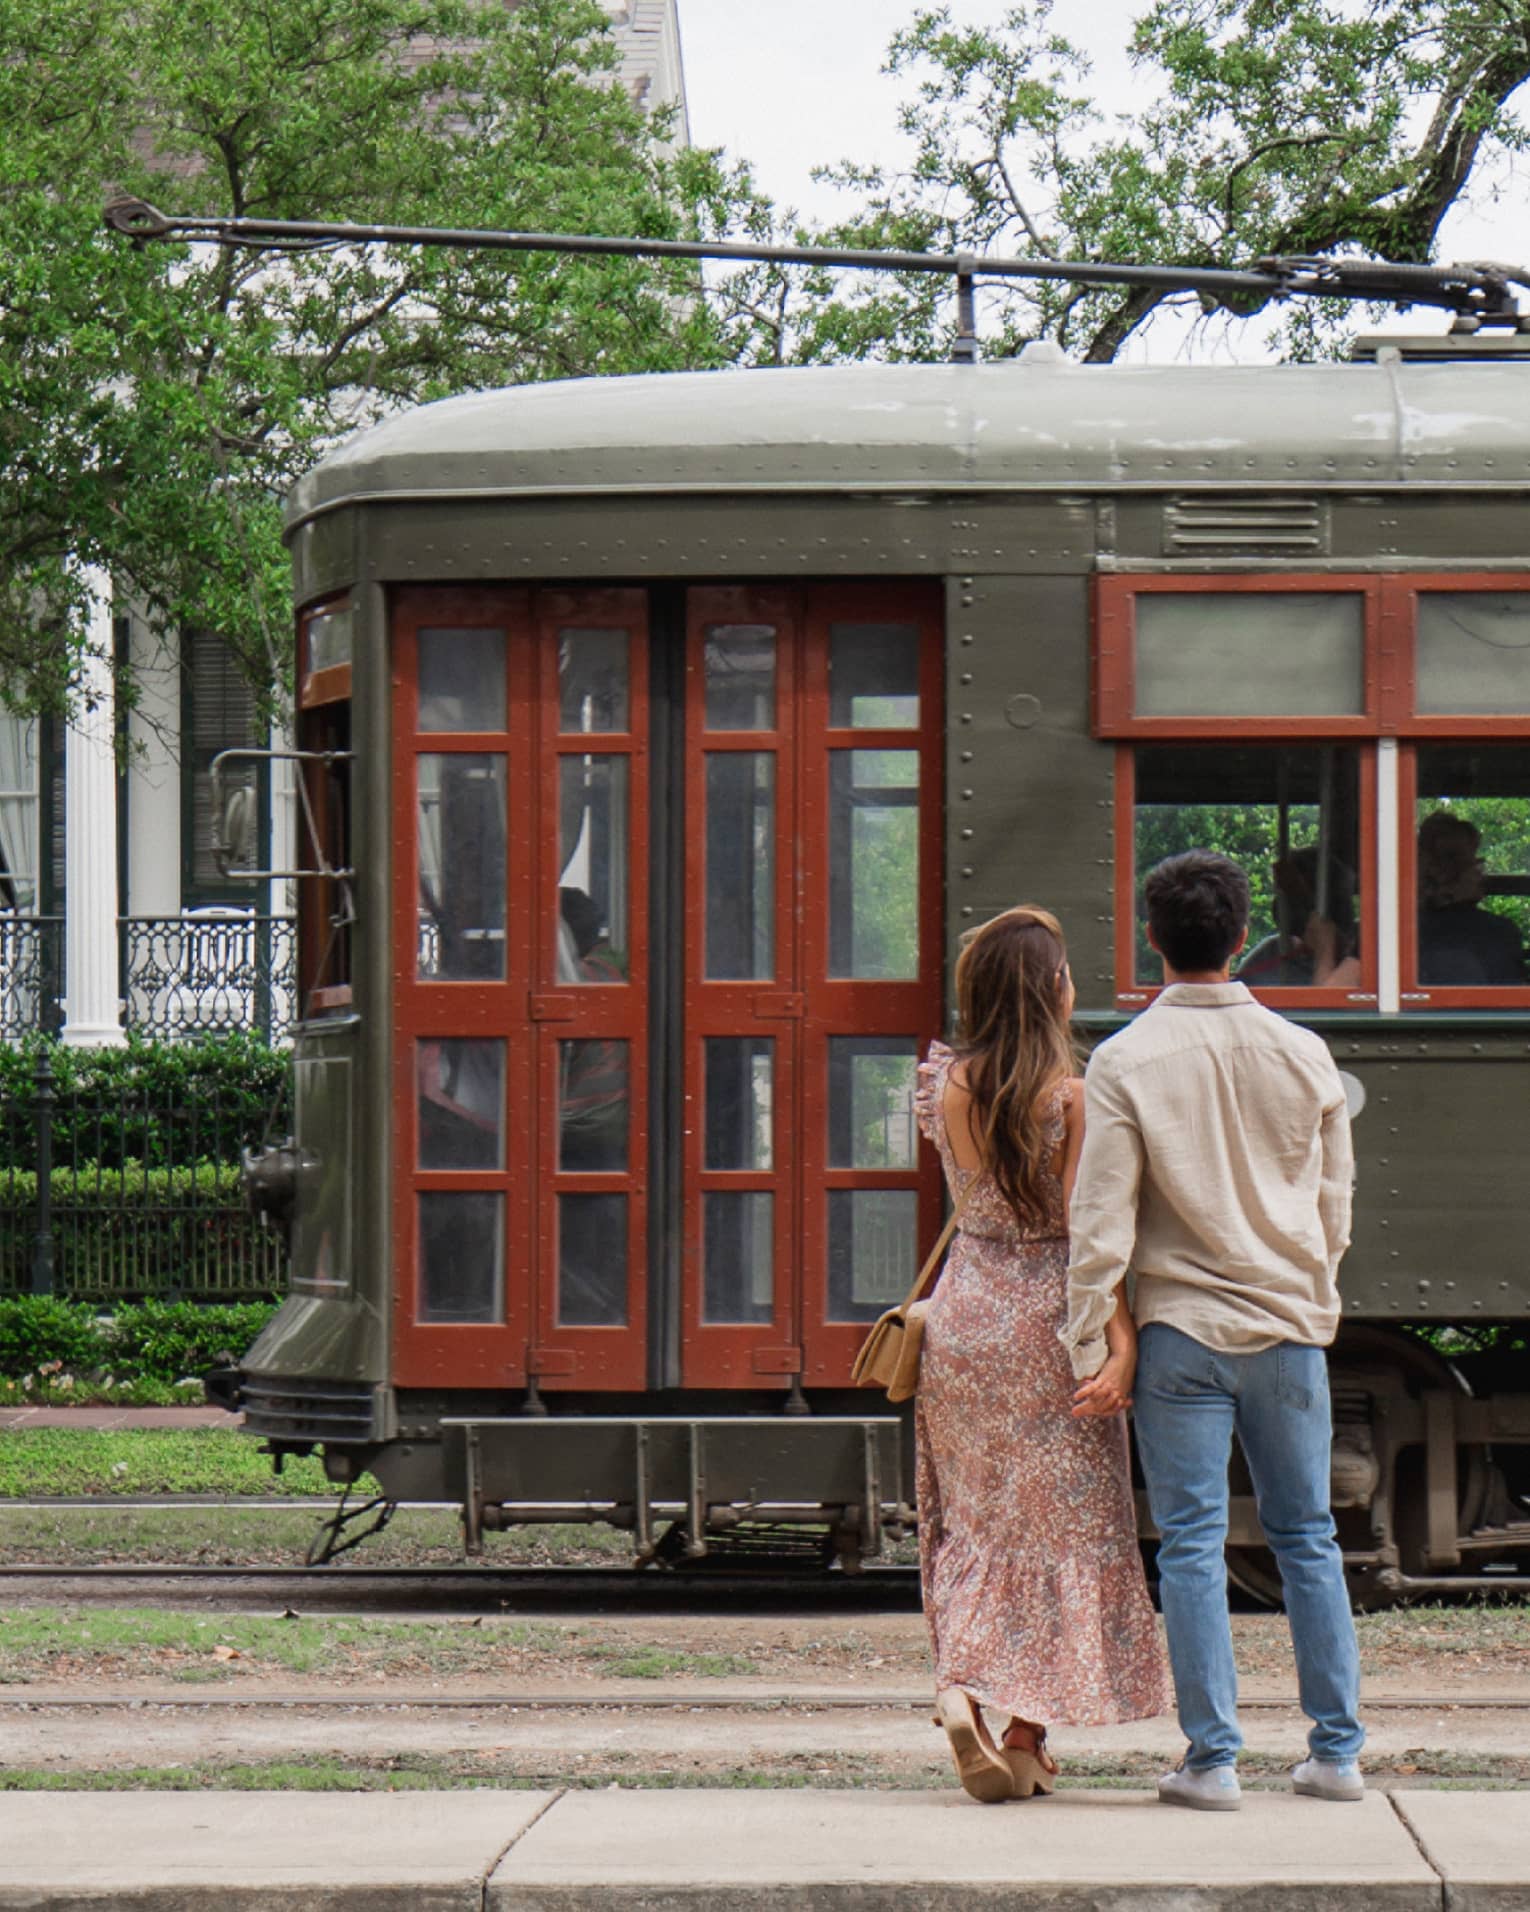 Woman and man hold hands in front of old-fashioned streetcar on New Orleans street, white house in background